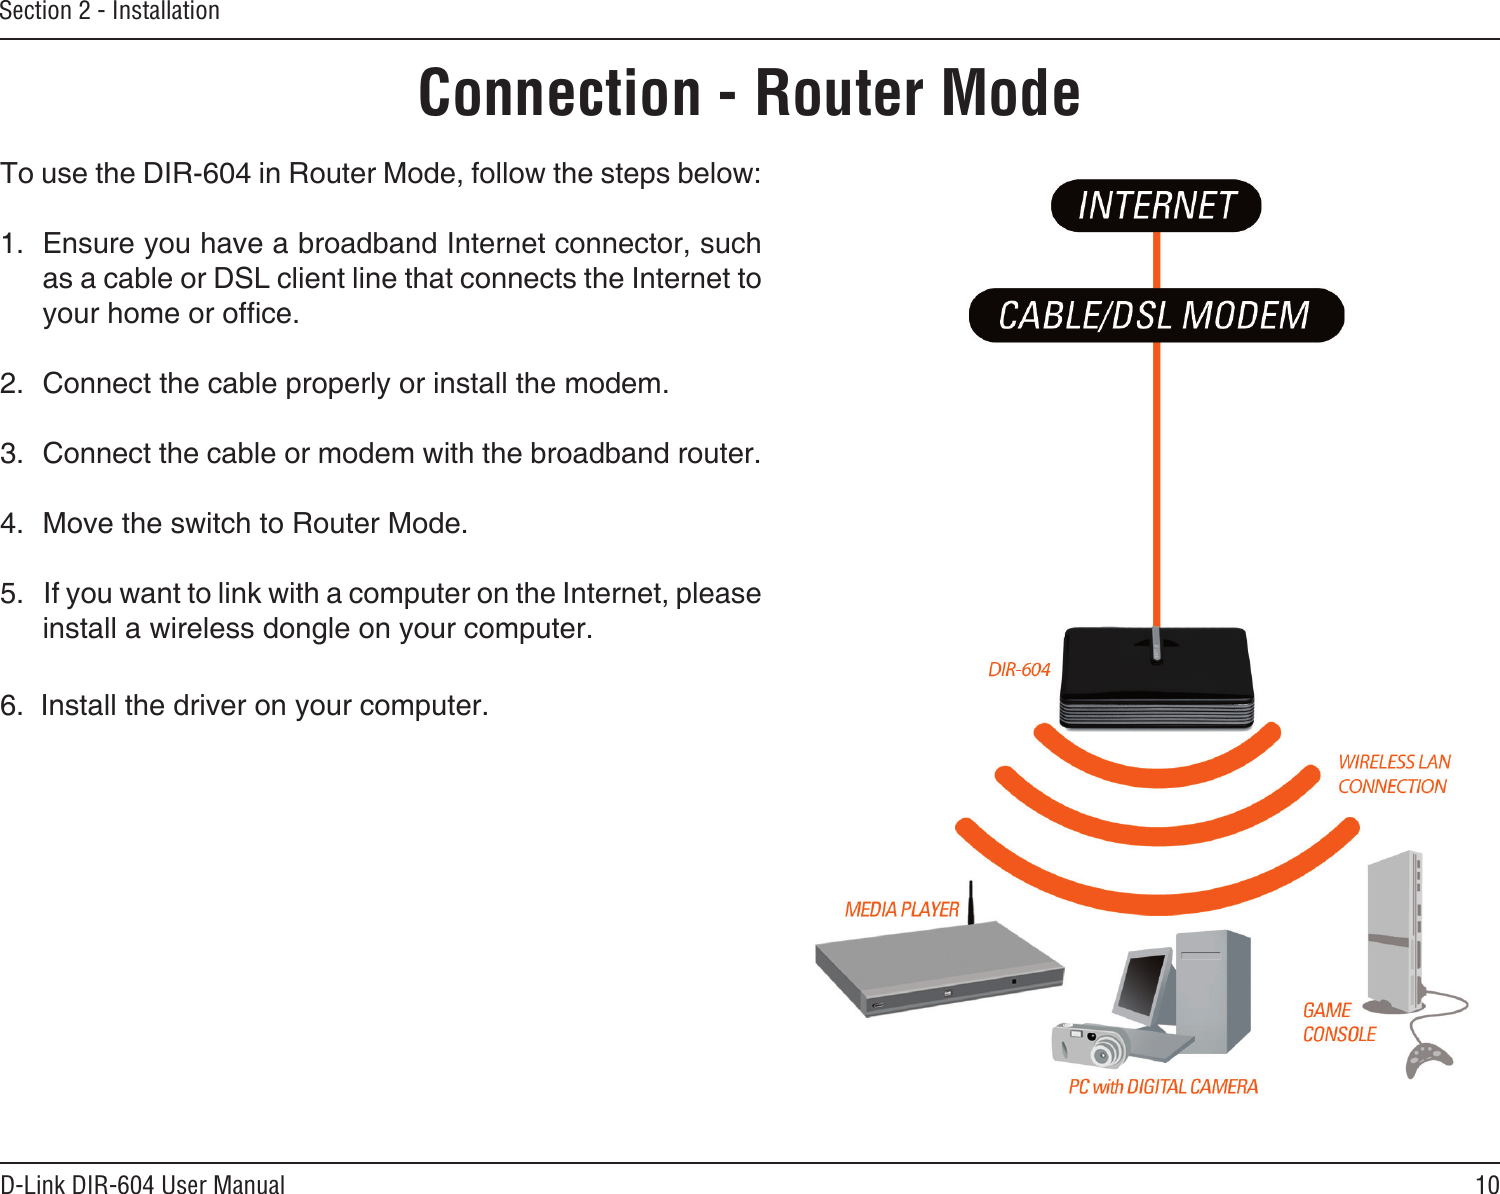 10D-Link DIR-604 User ManualSection 2 - InstallationConnection - Router ModeTo use the DIR-604 in Router Mode, follow the steps below:1.  Ensure you have a broadband Internet connector, such as a cable or DSL client line that connects the Internet to your home or ofce. 2.  Connect the cable properly or install the modem.3.  Connect the cable or modem with the broadband router.  4.  Move the switch to Router Mode. 5.   If you want to link with a computer on the Internet, please install a wireless dongle on your computer. 6.  Install the driver on your computer.